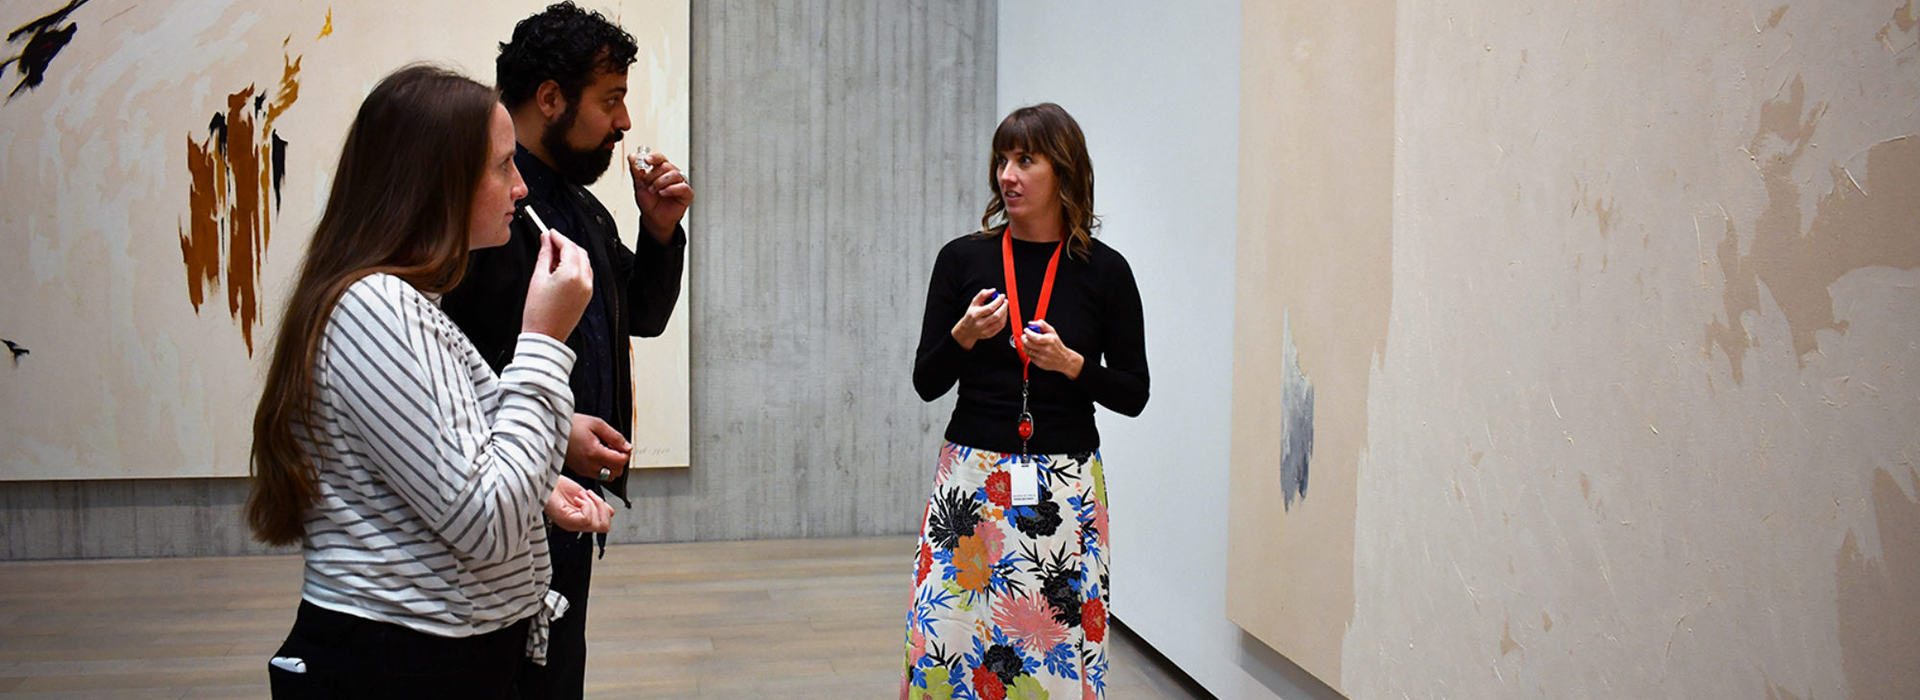 Two people smell items while a tour guide talks to them in a gallery